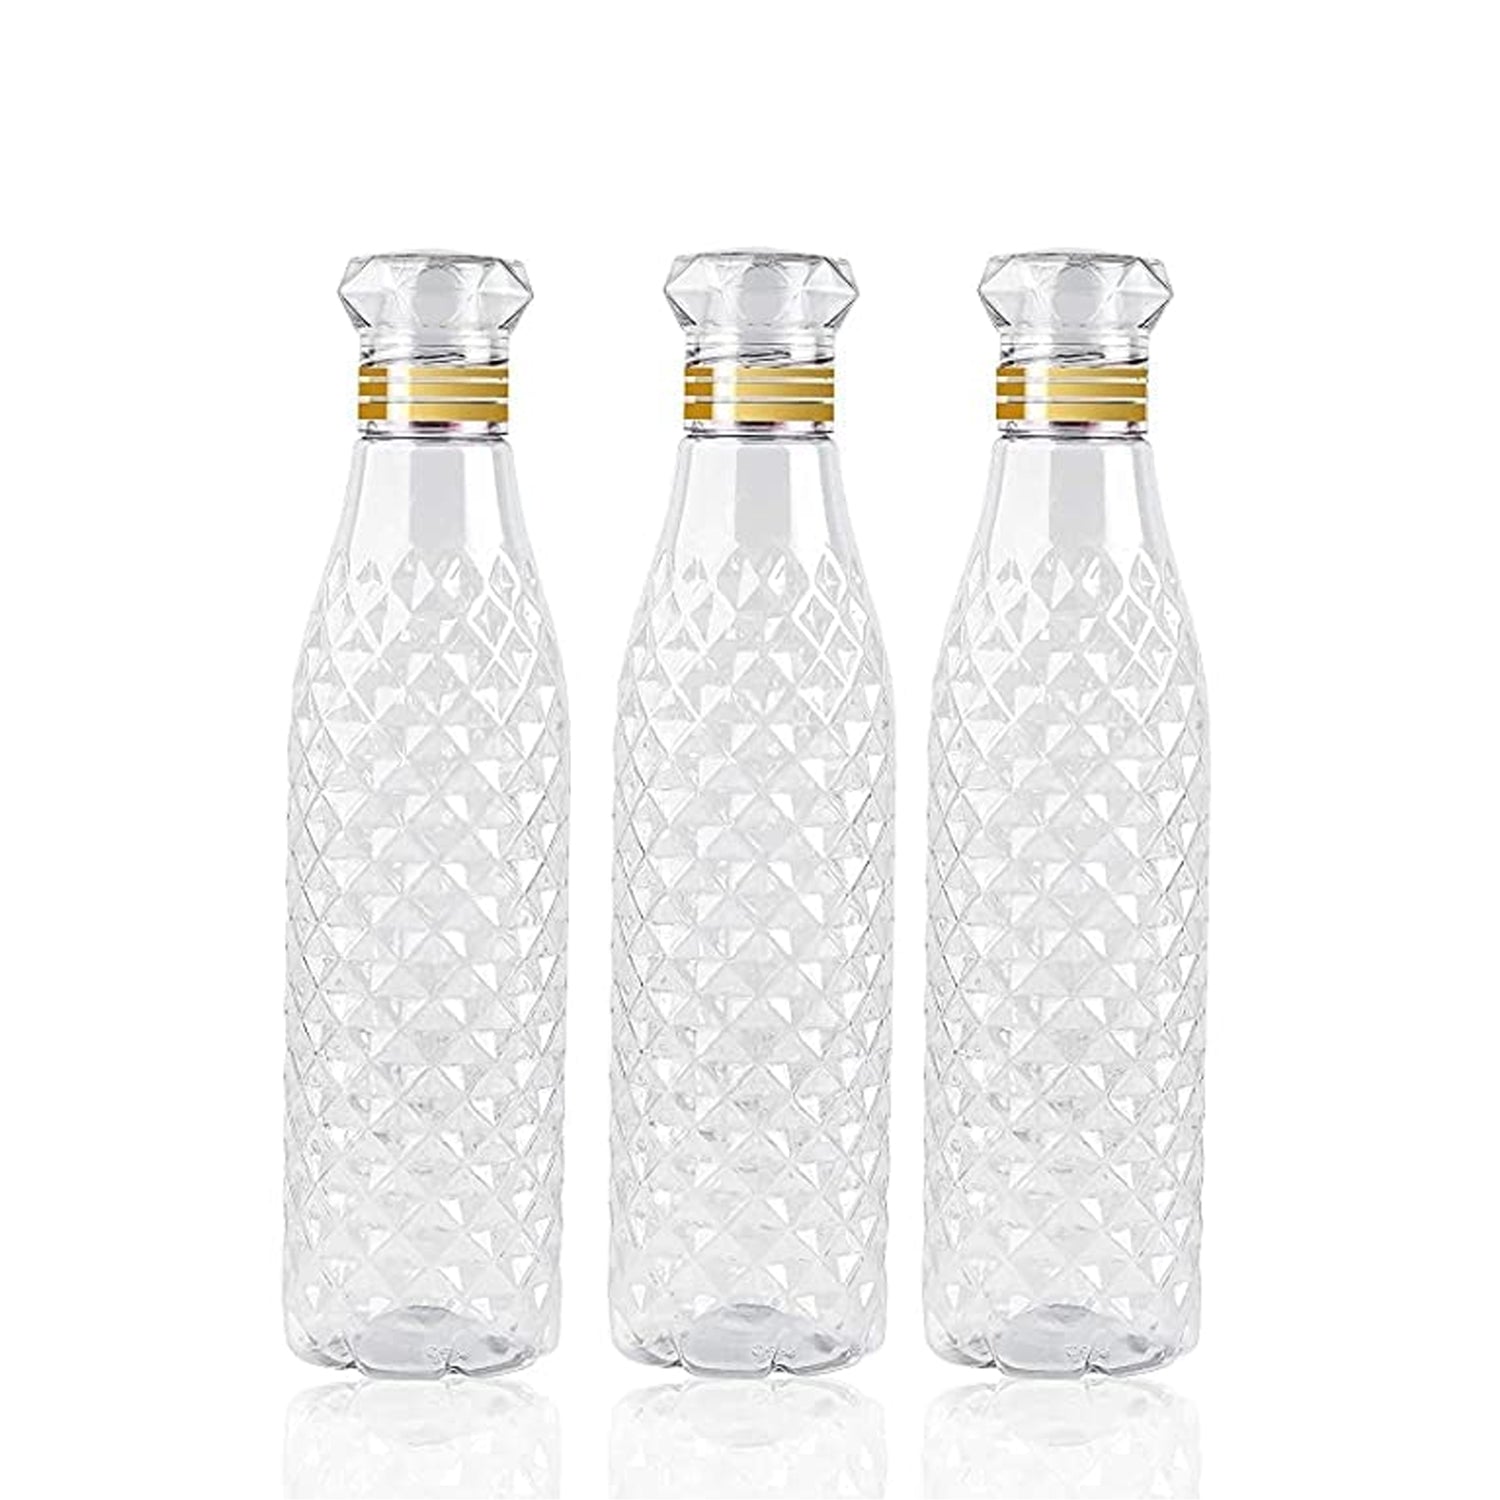 7116 Water Bottle With Diamond Cut Used By Kids, Children's ( 3 pcs )